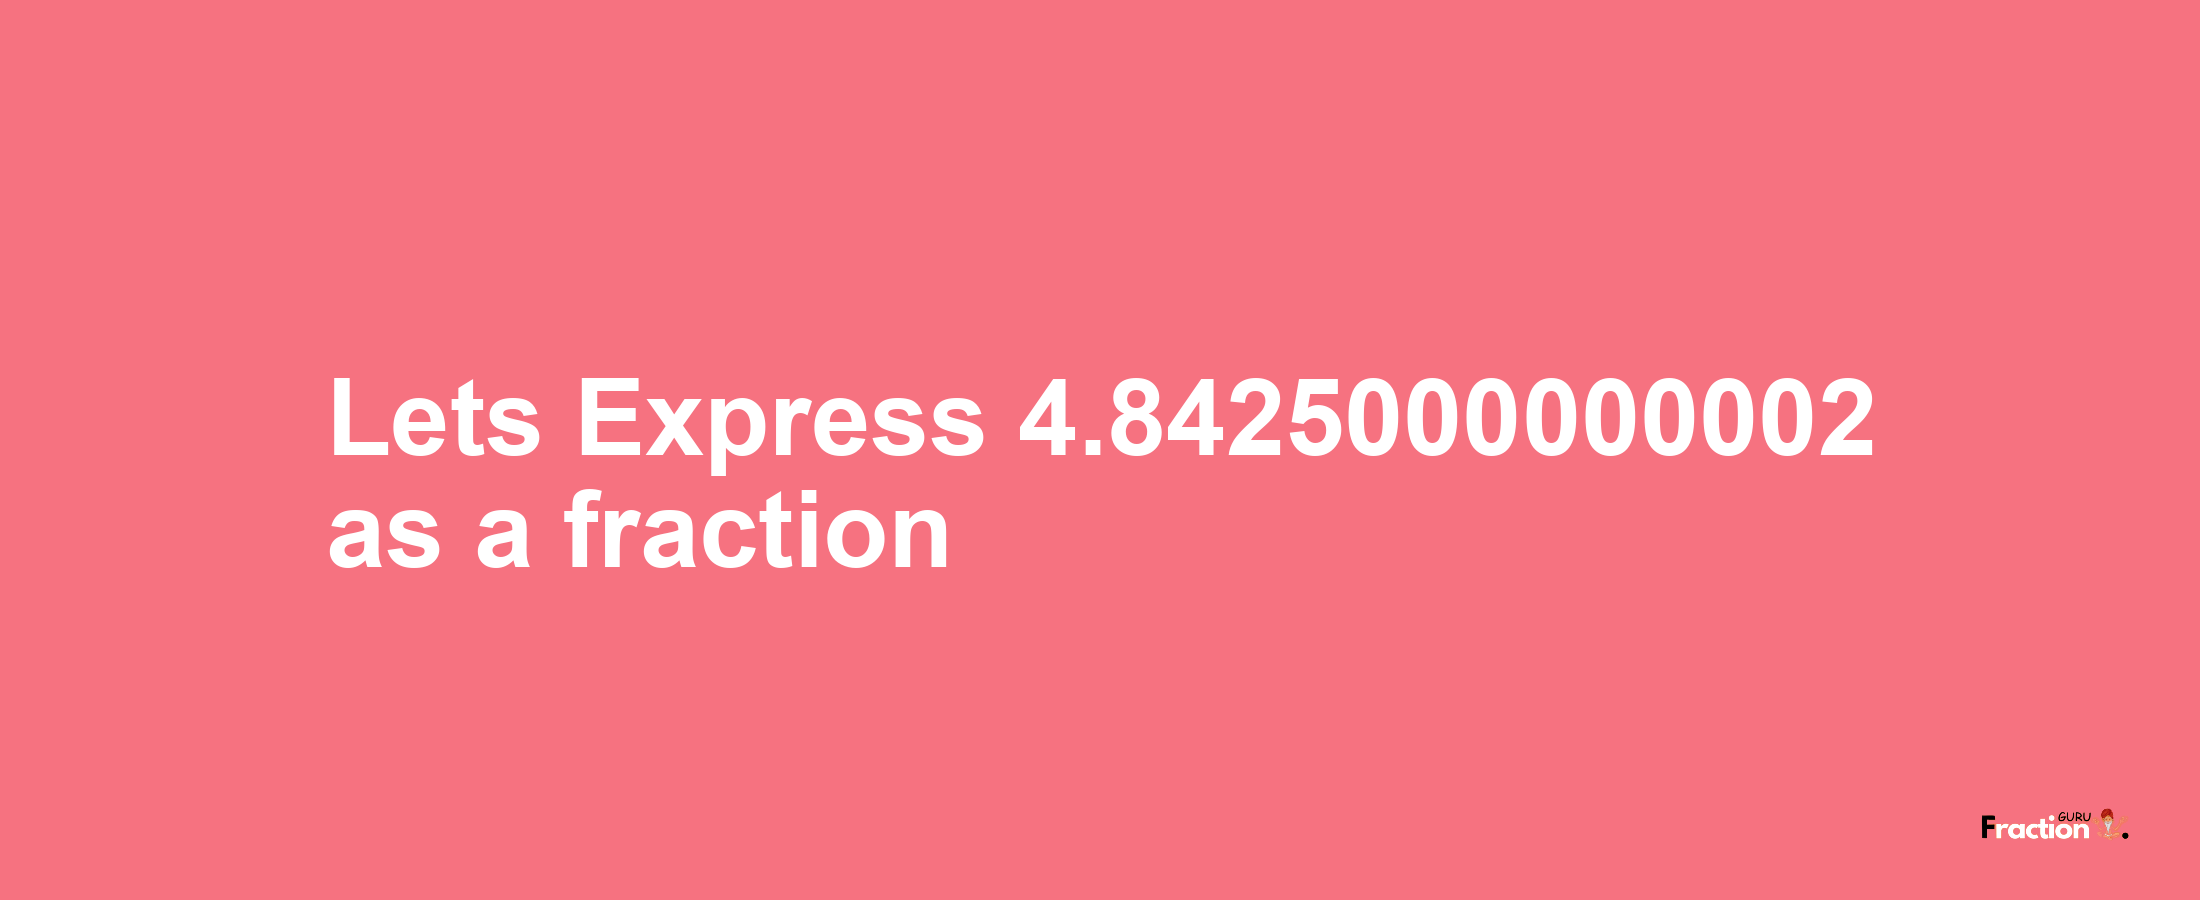 Lets Express 4.8425000000002 as afraction